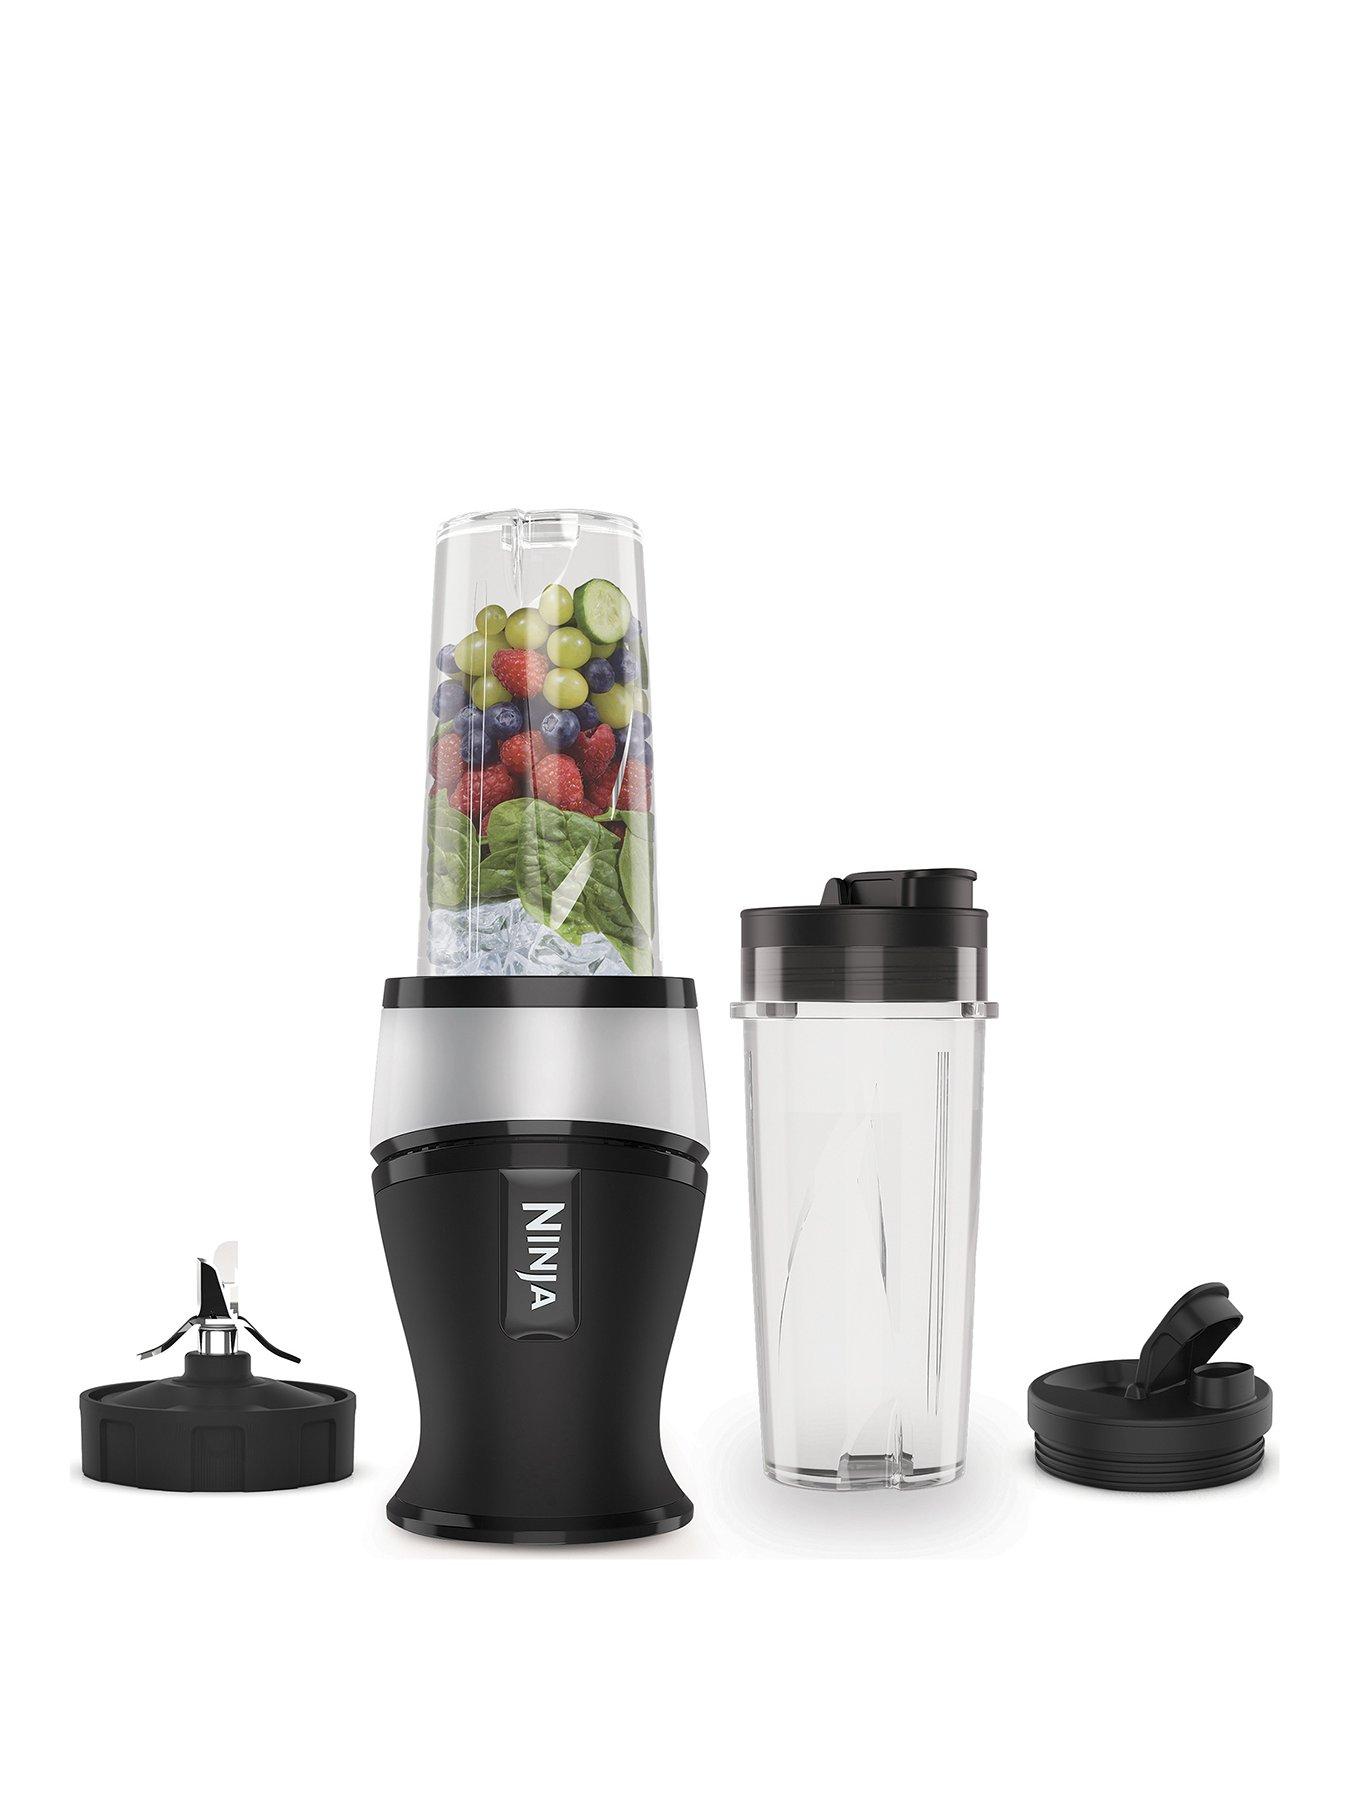 Dash Quest Countertop Blender 1.5L - Stainless Steel Blades for